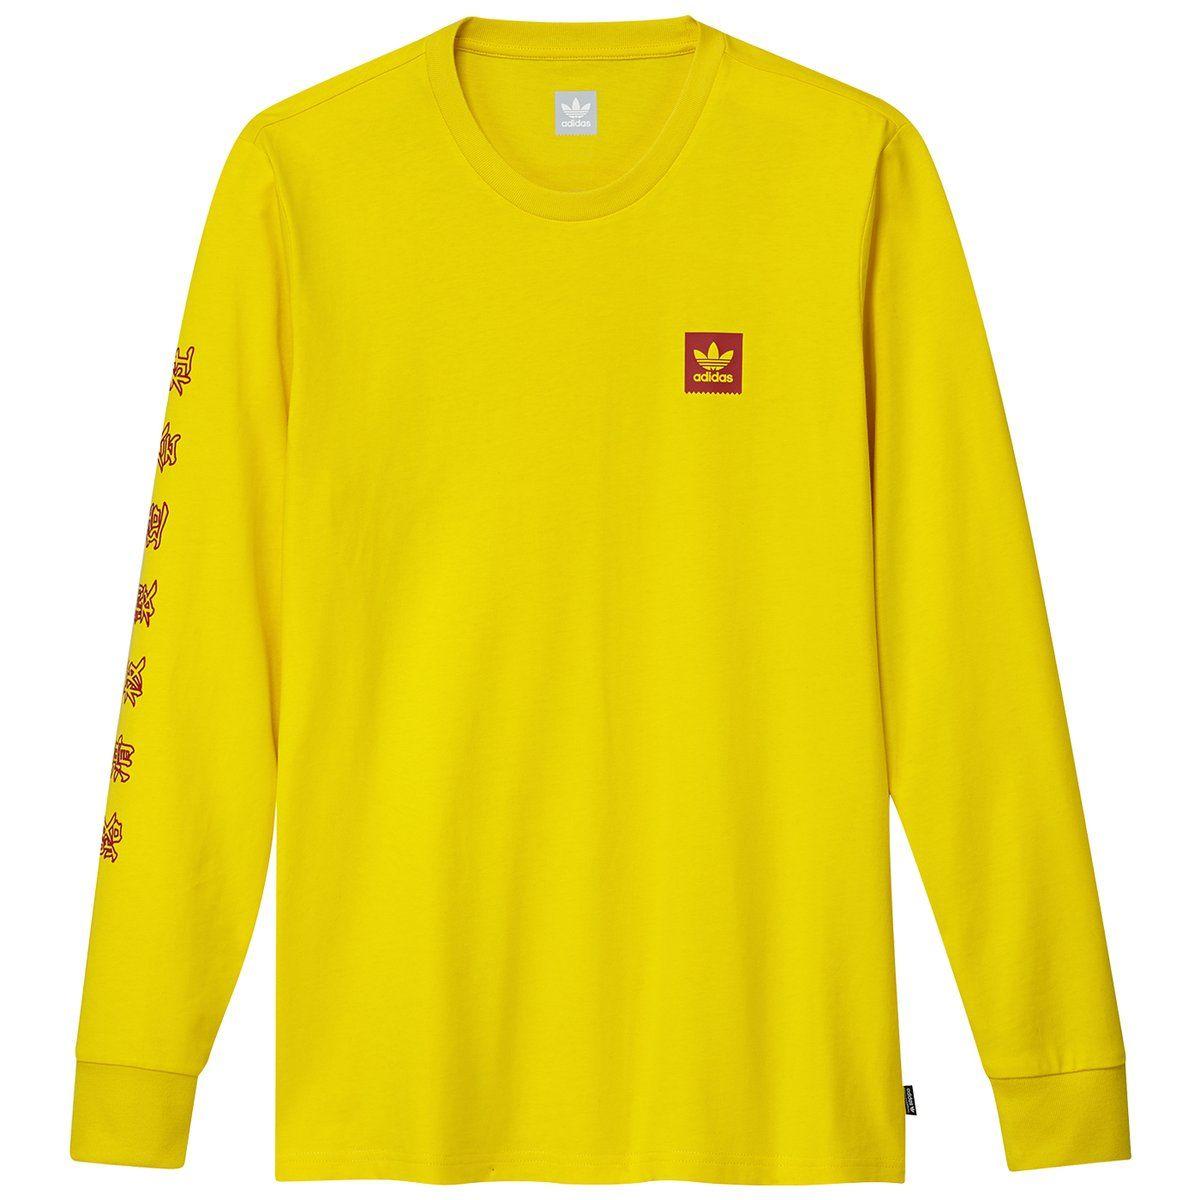 Yellow and Red L Logo - Adidas x Evisen L/S T Shirt in Yellow / Scarlet by Adidas ...